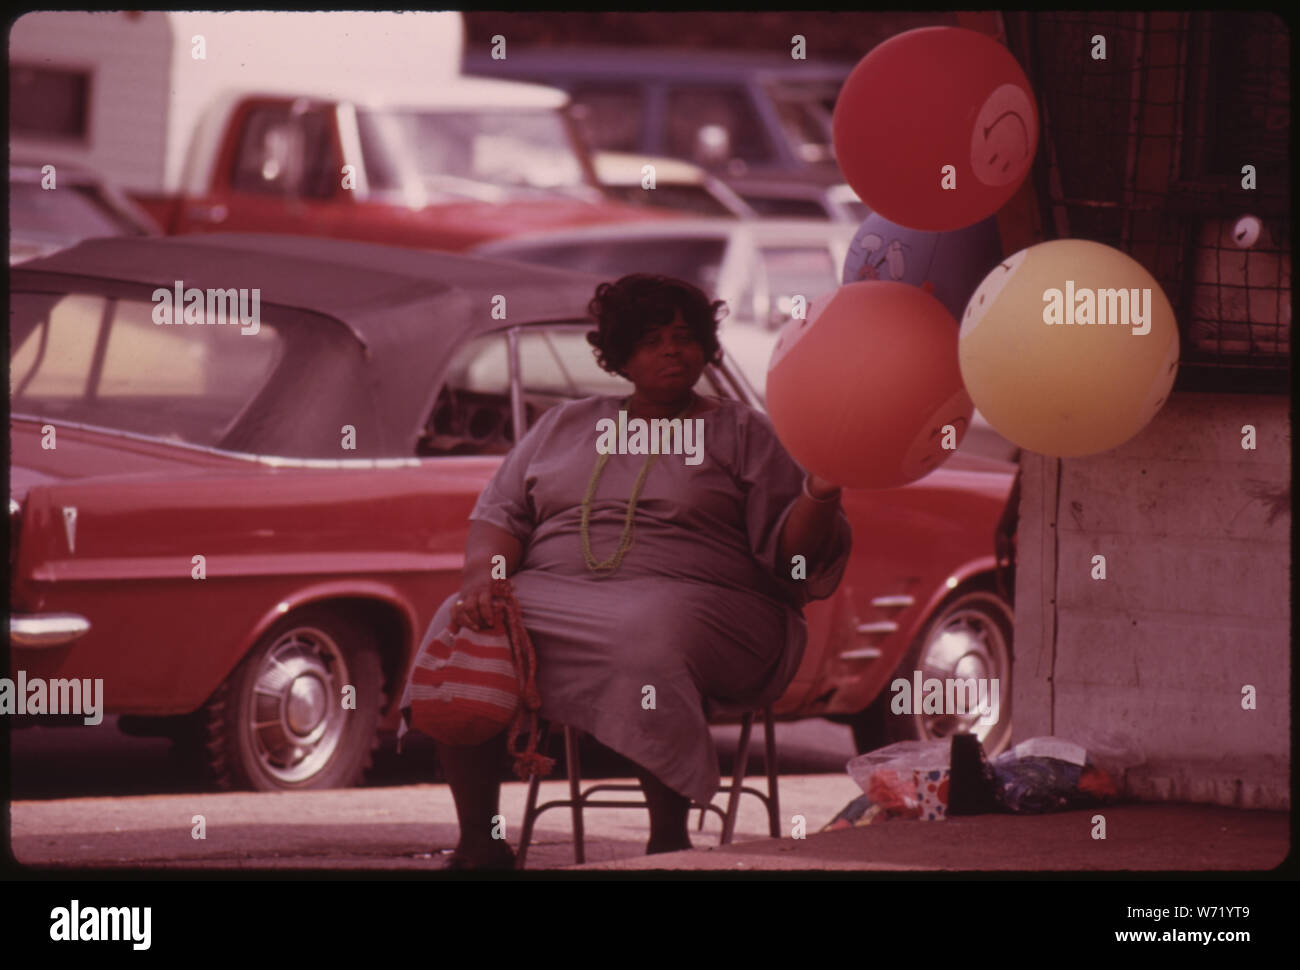 BLACK WOMAN SELLING GAS FILLED HAVE A HAPPY DAY BALLOONS ON A CHICAGO SOUTH SIDE STREET CORNER AT SOX PARK BASEBALL FIELD MANY OF THE CITY'S BLACK BUSINESS OWNERS STARTED WITH SMALL OPERATIONS SUCH AS THIS AND GREW BY WORKING HARD. TODAY CHICAGO IS BELIEVED TO BE THE BLACK BUSINESS CAPITAL OF THE UNITED STATES. BLACK ENTERPRISES MAGAZINE REPORTED IN 1973 THAT THE CITY HAD 14 OF THE TOP 100 BLACK OWNED BUSINESSES IN THE COUNTRY, ONE MORE THAN NEW YORK CITY Stock Photo